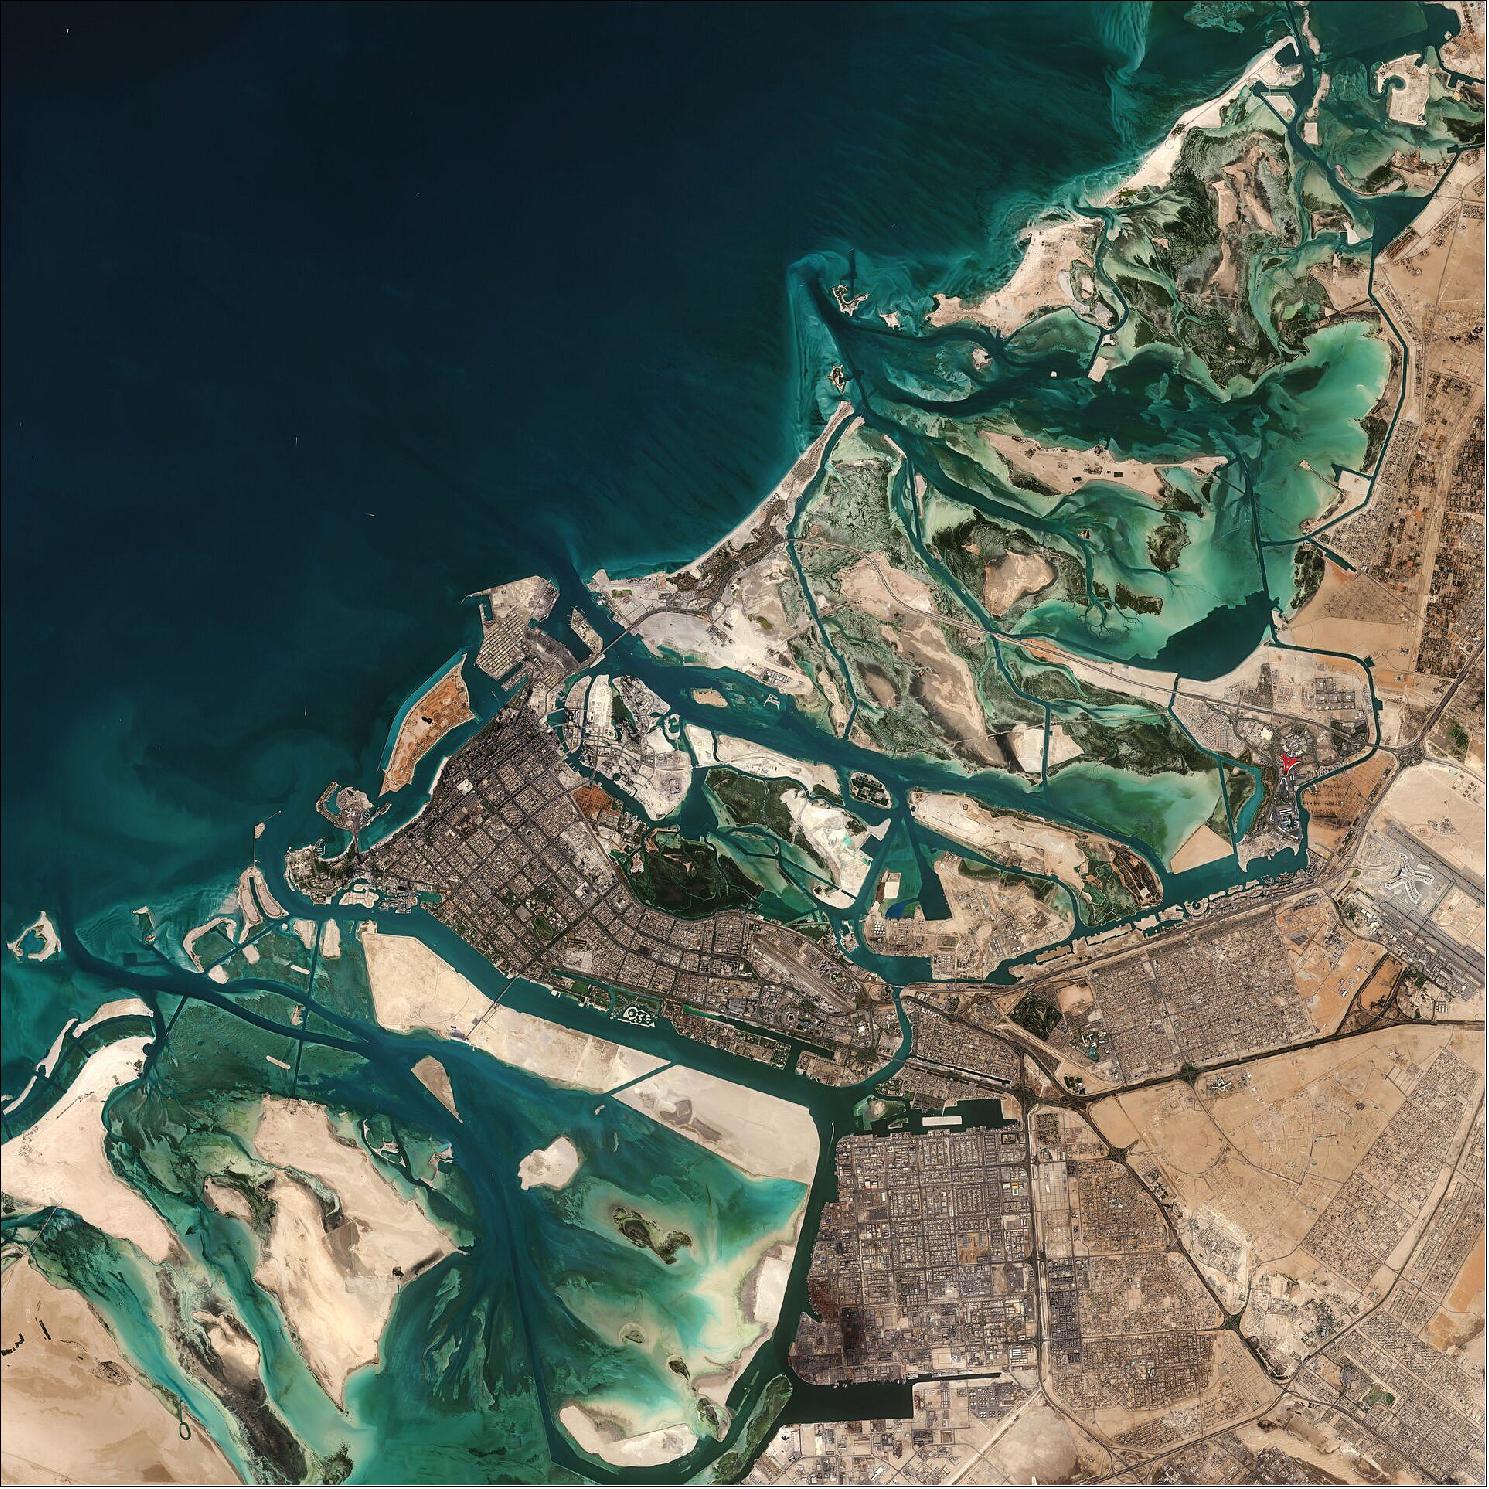 Figure 36: The city of Abu Dhabi, after which the emirate is named, is located on an island in the Persian Gulf and can be seen slightly below the center of the image. Abu Dhabi is the capital and the second-most populous city of the UAE – after Dubai. The city is directly connected to the mainland by three bridges: Maqta, Mussafah and Sheikh Zayed. This image, captured on 27 January 2019, is also featured on the Earth from Space video program (image credit: ESA, the image contains modified Copernicus Sentinel data (2019), processed by ESA, CC BY-SA 3.0 IGO)